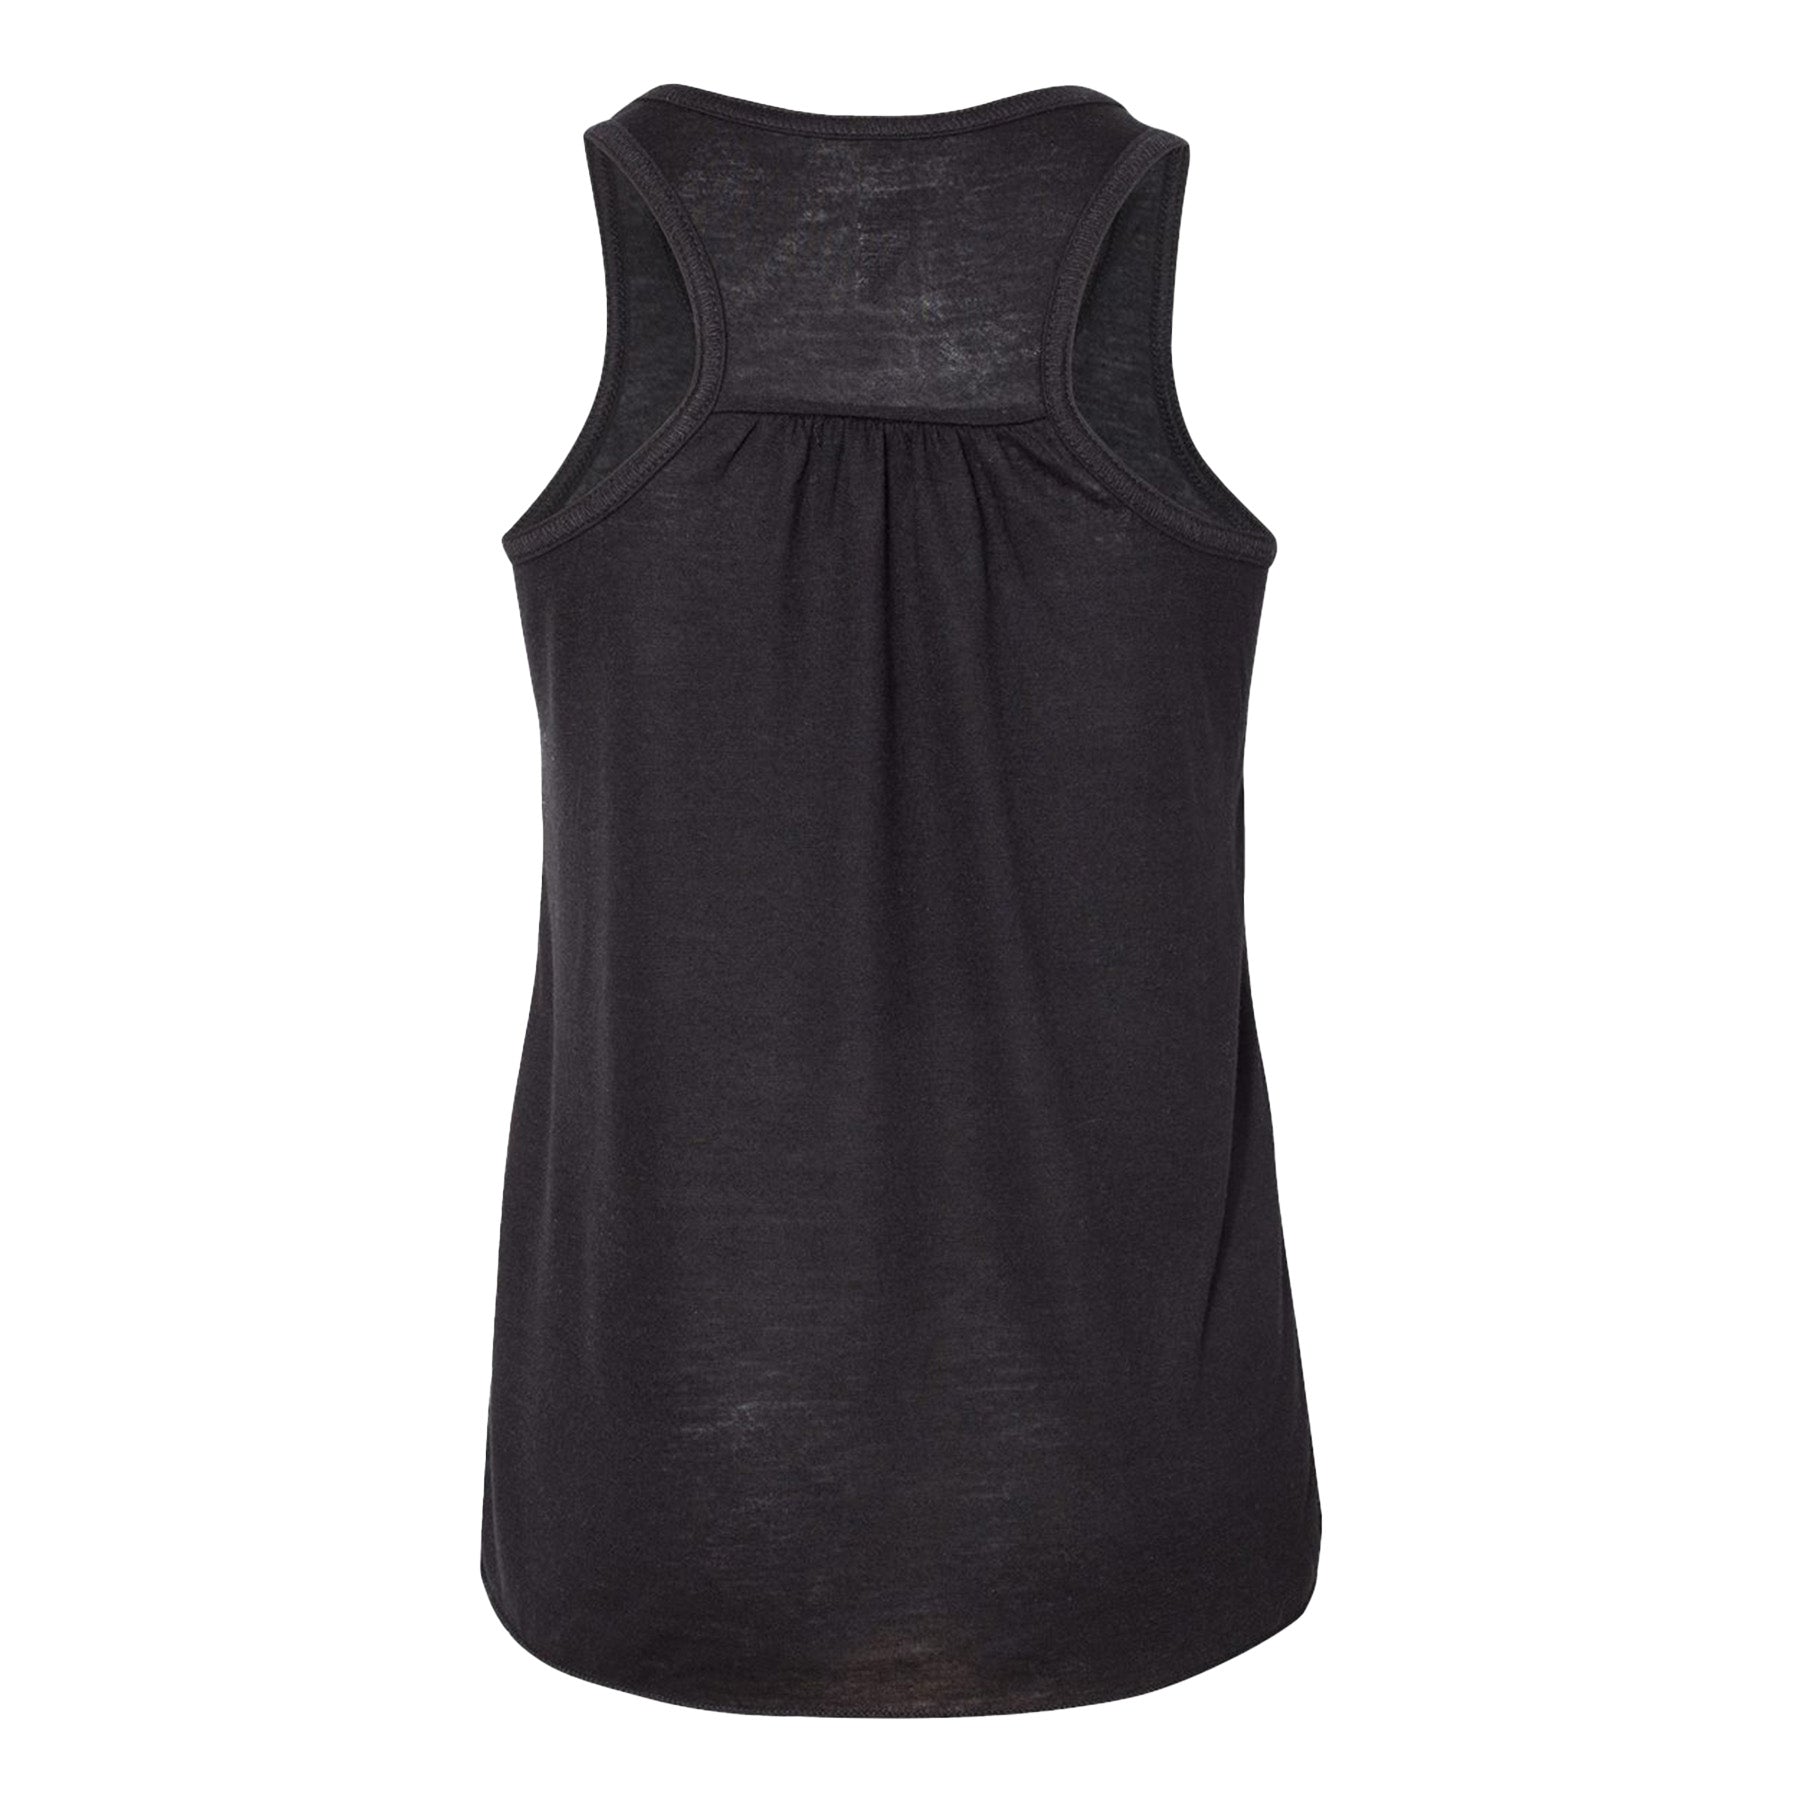 JoffreyRED Contemporary Ballet Youth Tank